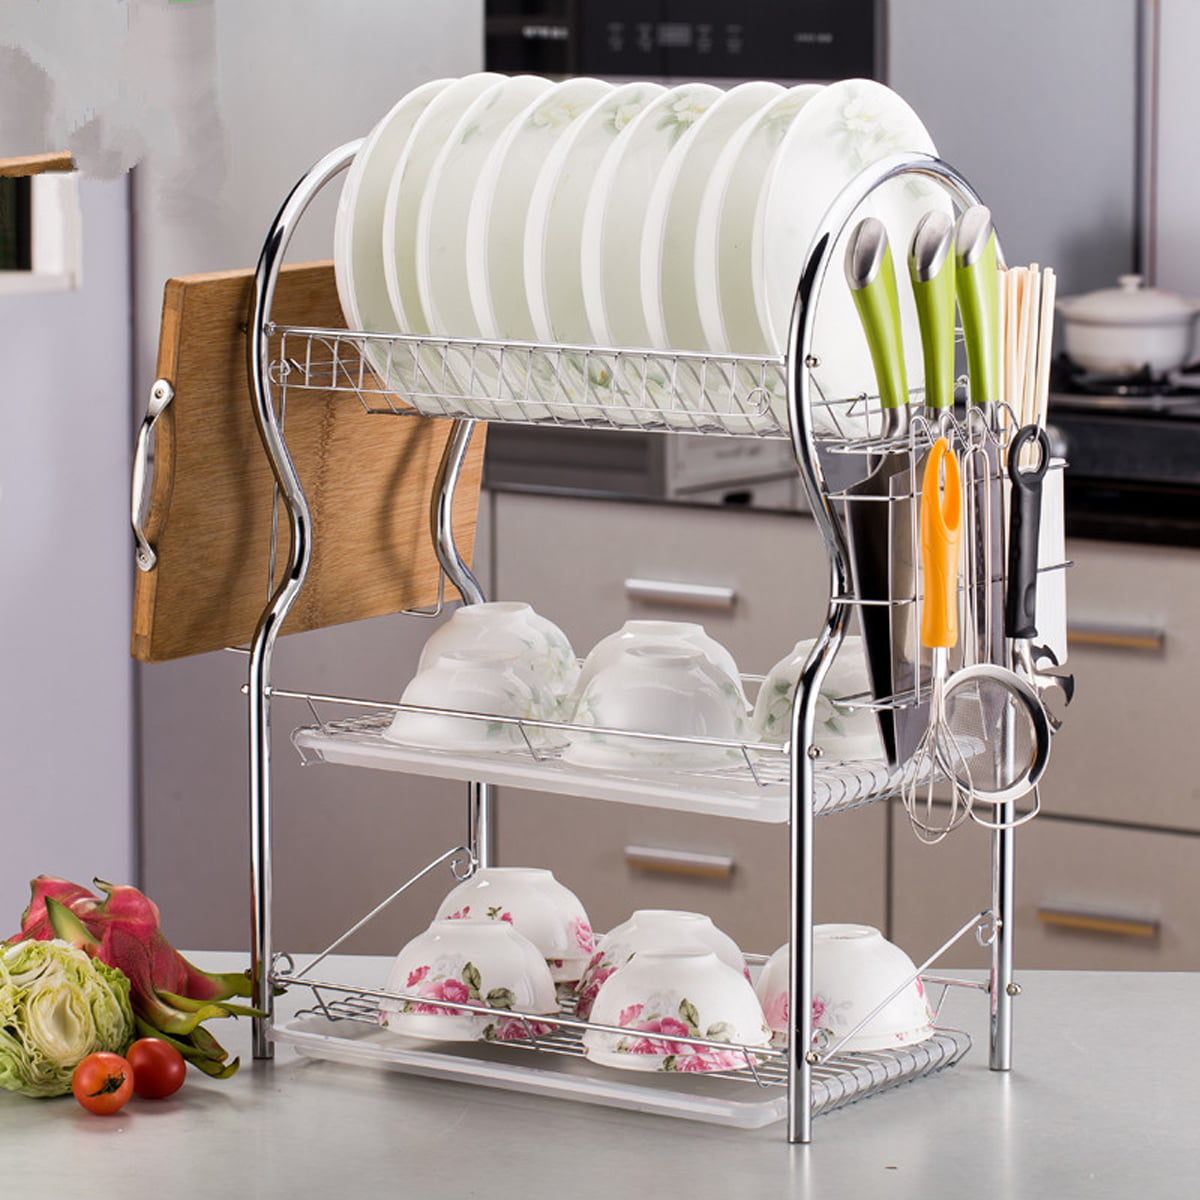 3 Tier Stainless Steel Dish Rack Kitchen Cutlery Storage Drainer Drying Tray Set 